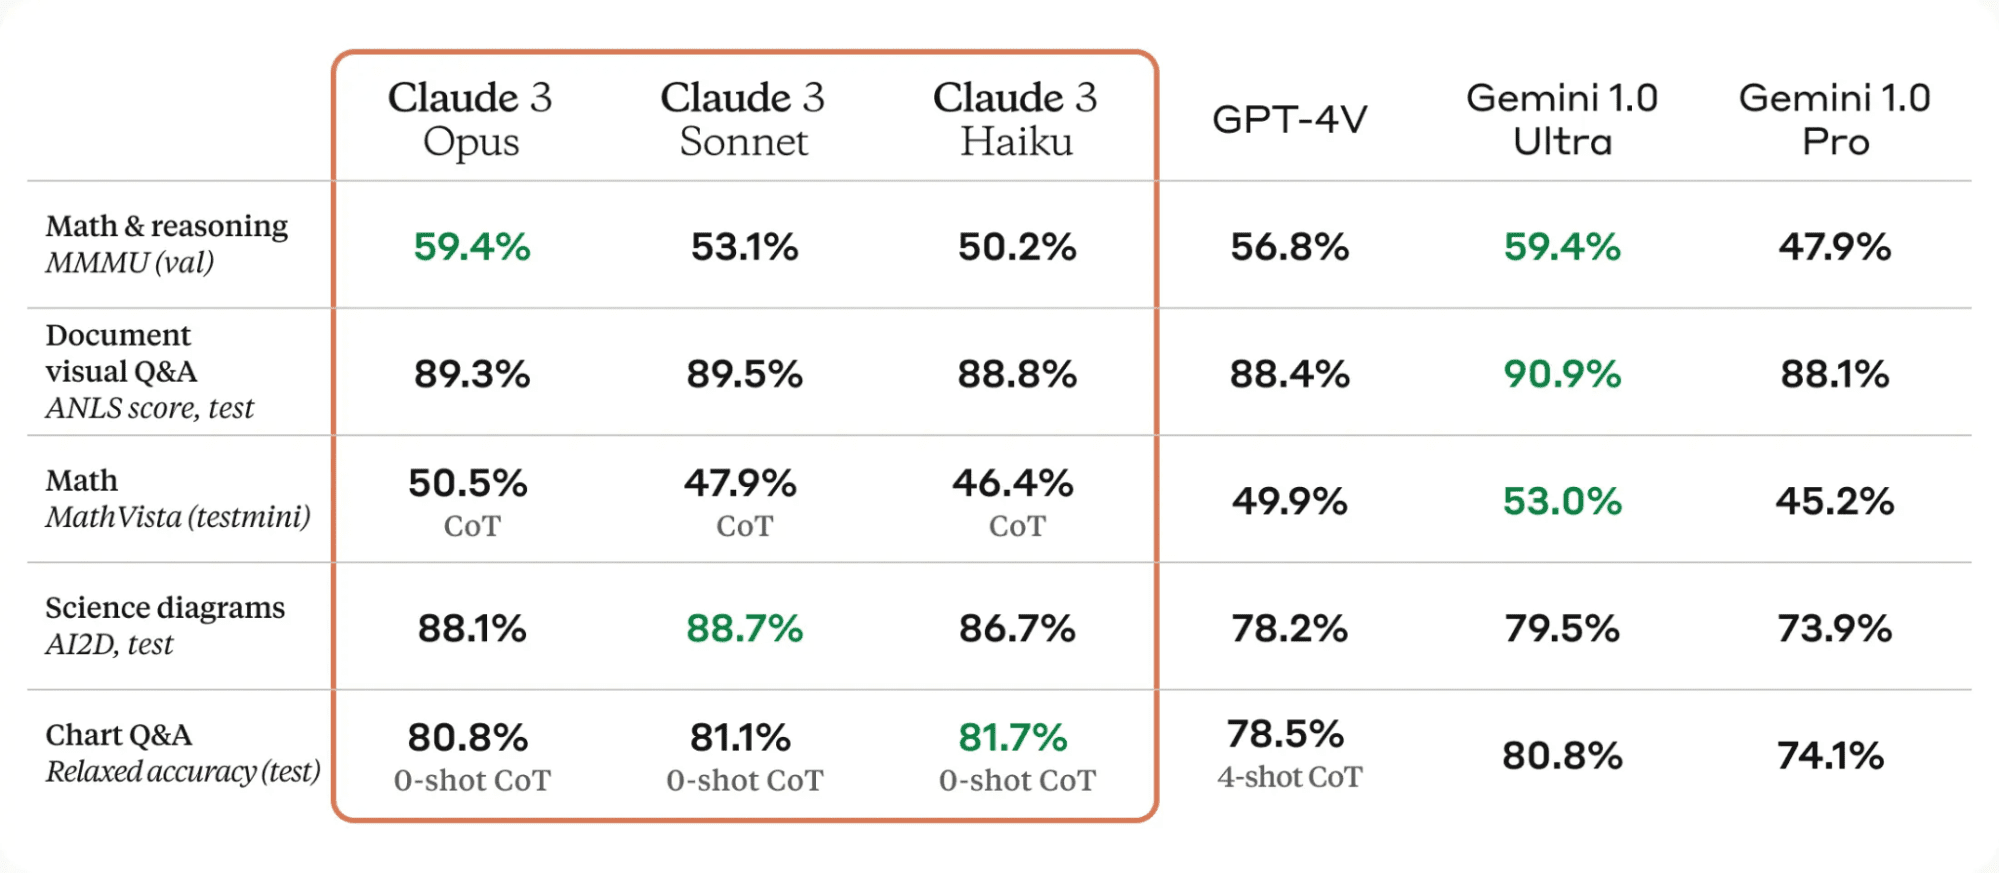 Getting Started With Claude 3 Opus That Just Destroyed GPT-4 and Gemini